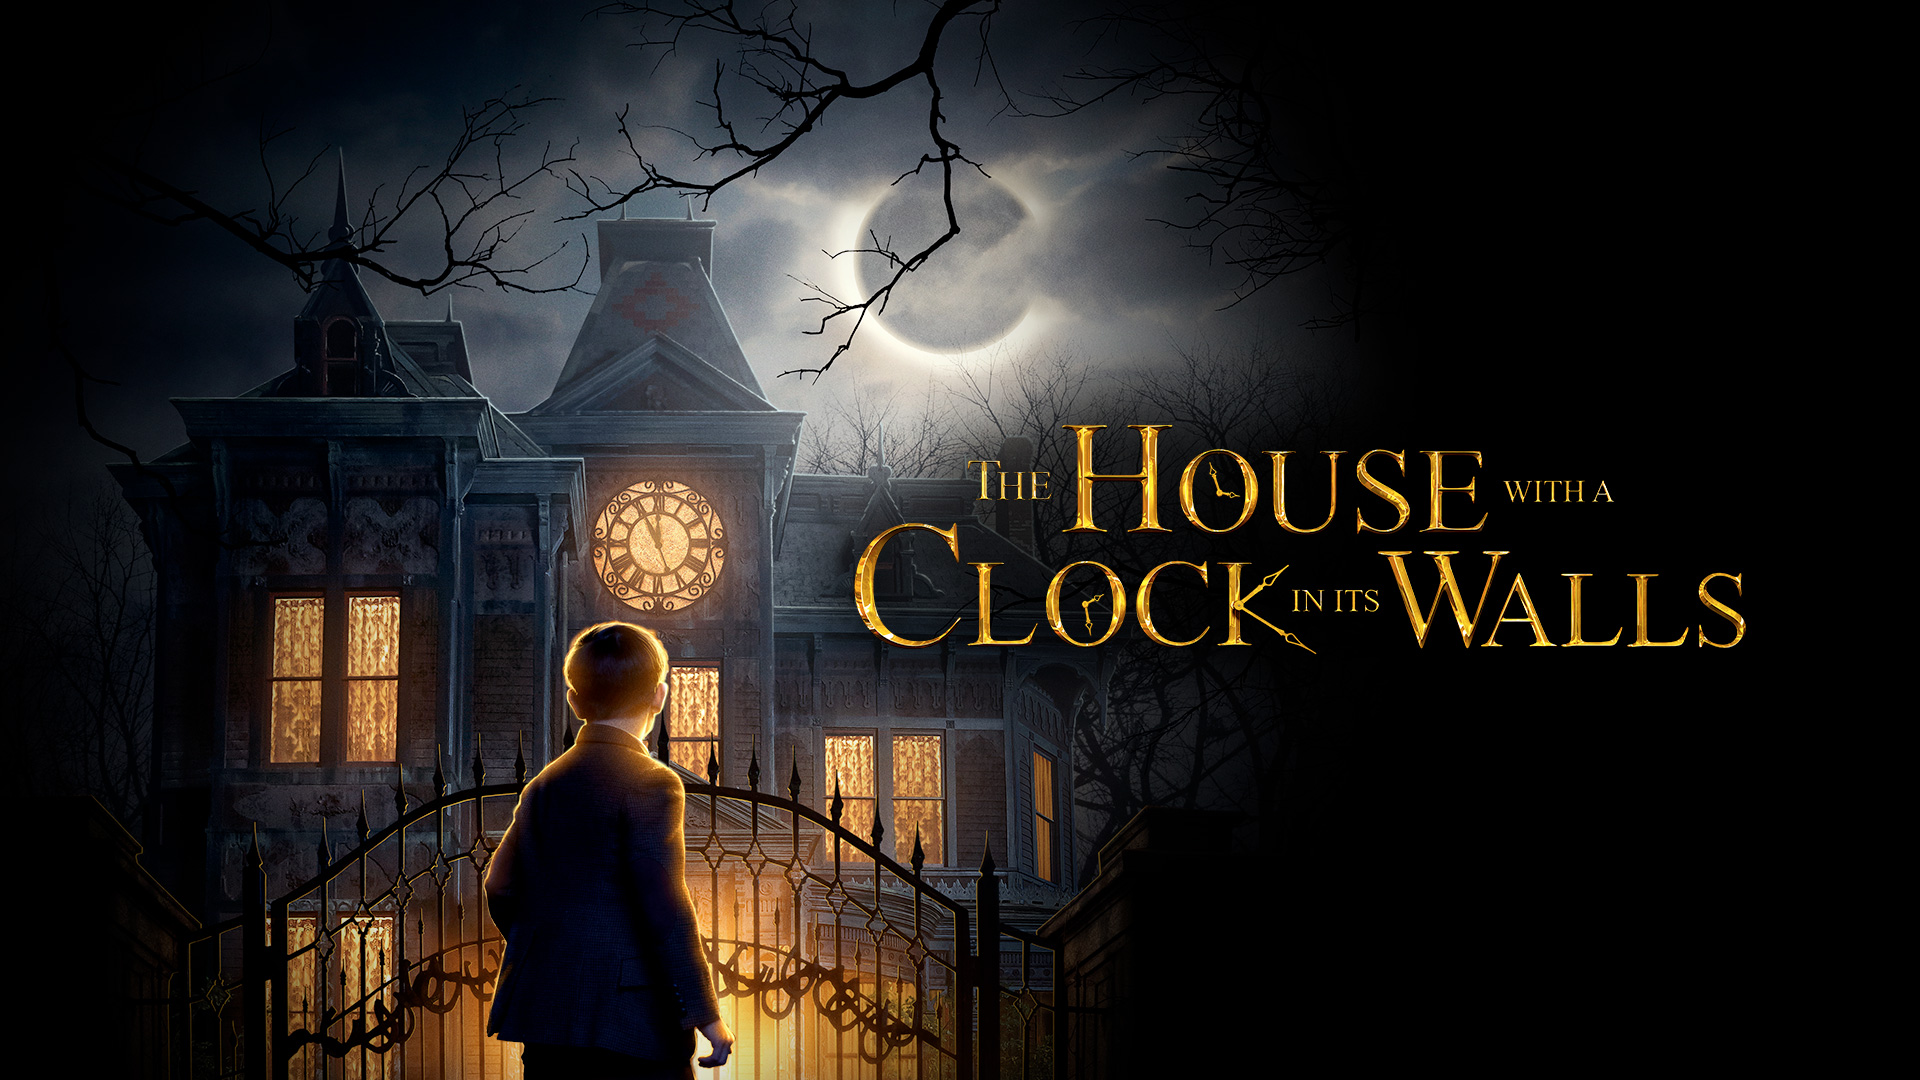 THE HOUSE WITH A CLOCK IN ITS WALLS starring Jack Black and two-time Academy Award winner Cate Blanchett.